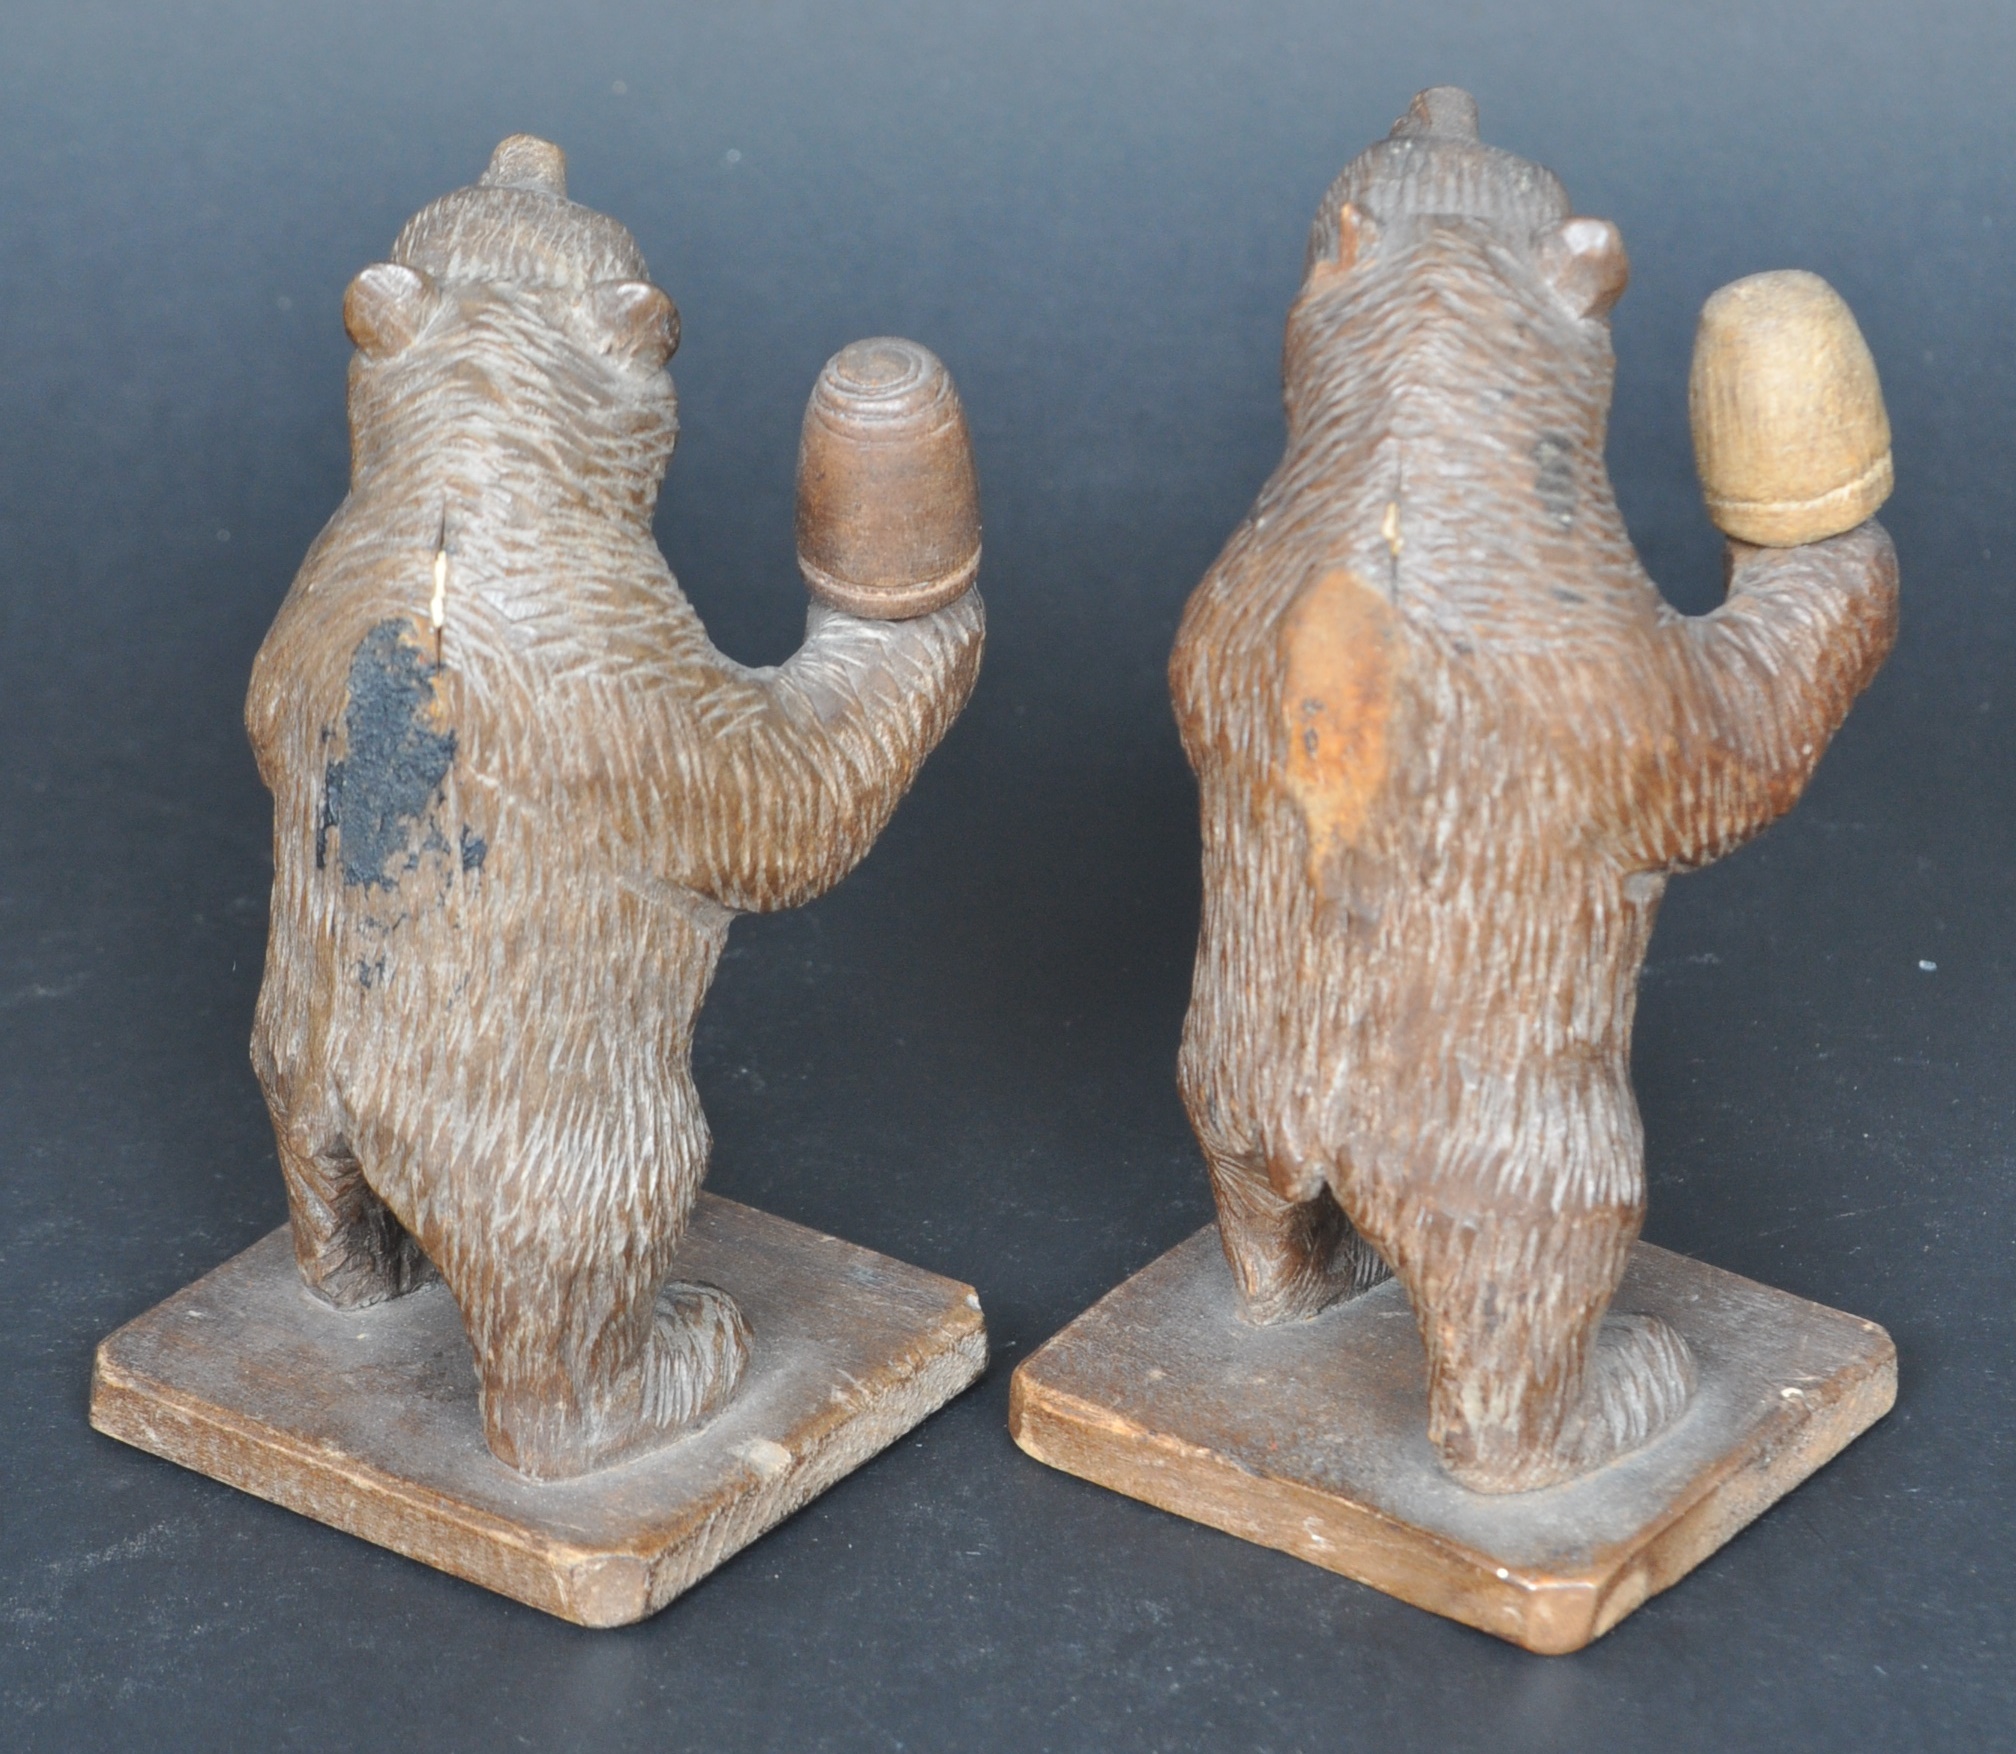 PAIR OF 19TH CENTURY BLACK FOREST CARVED BEAR THIMBLE HOLDERS - Image 5 of 5